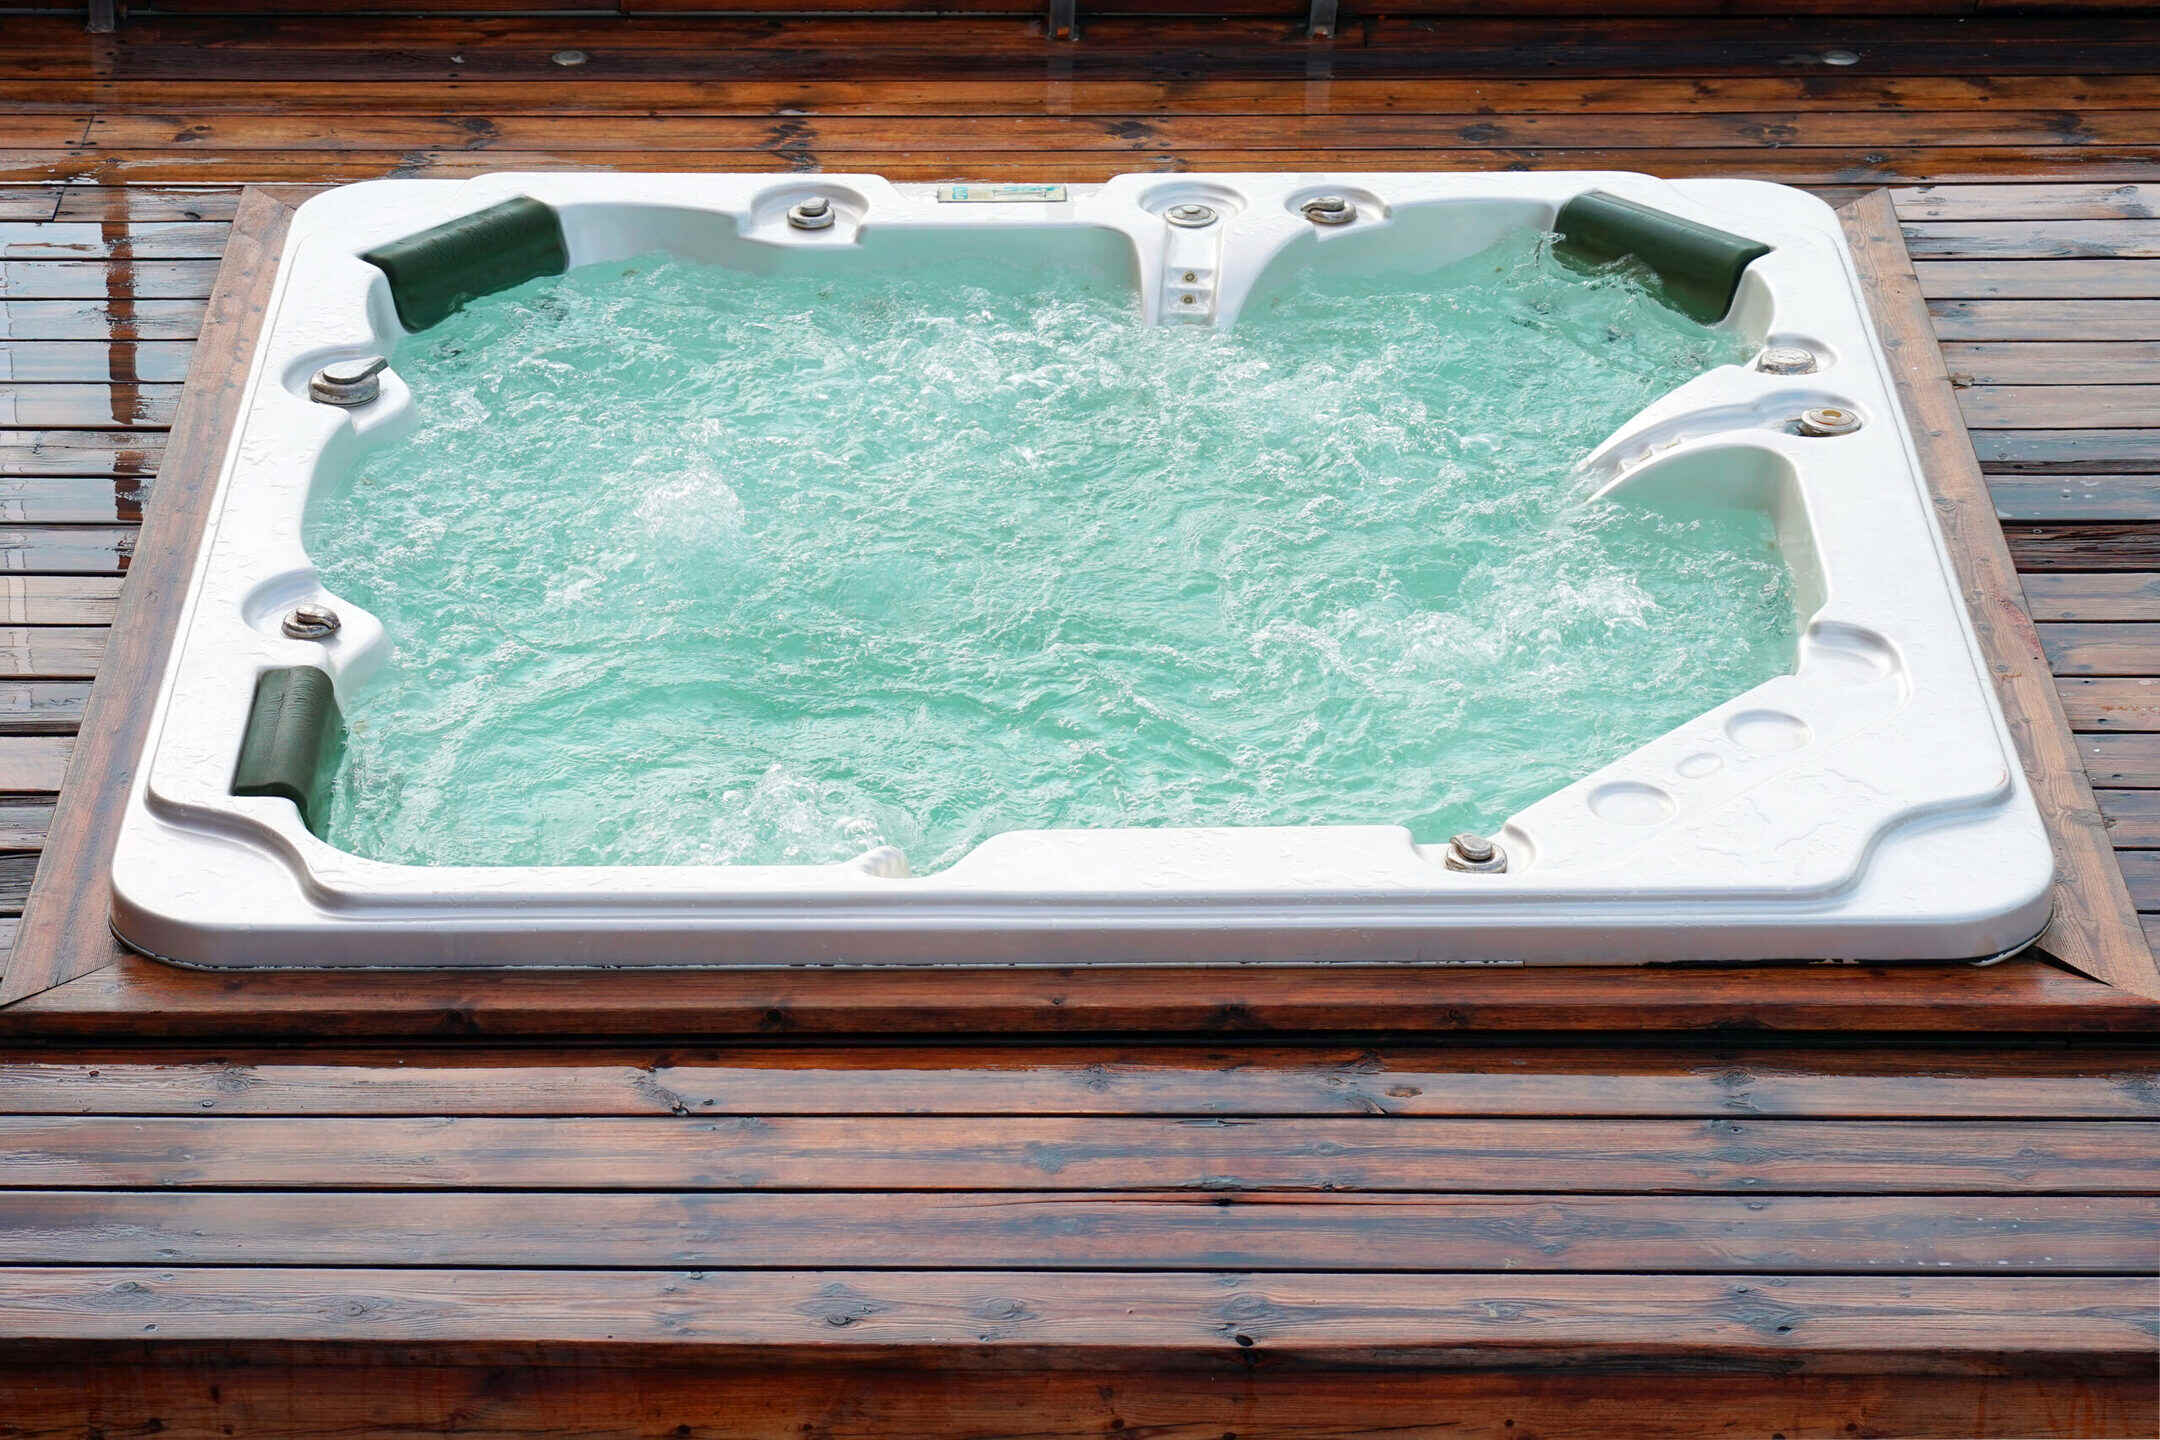 How To Bring Down Bromine Level In Hot Tub